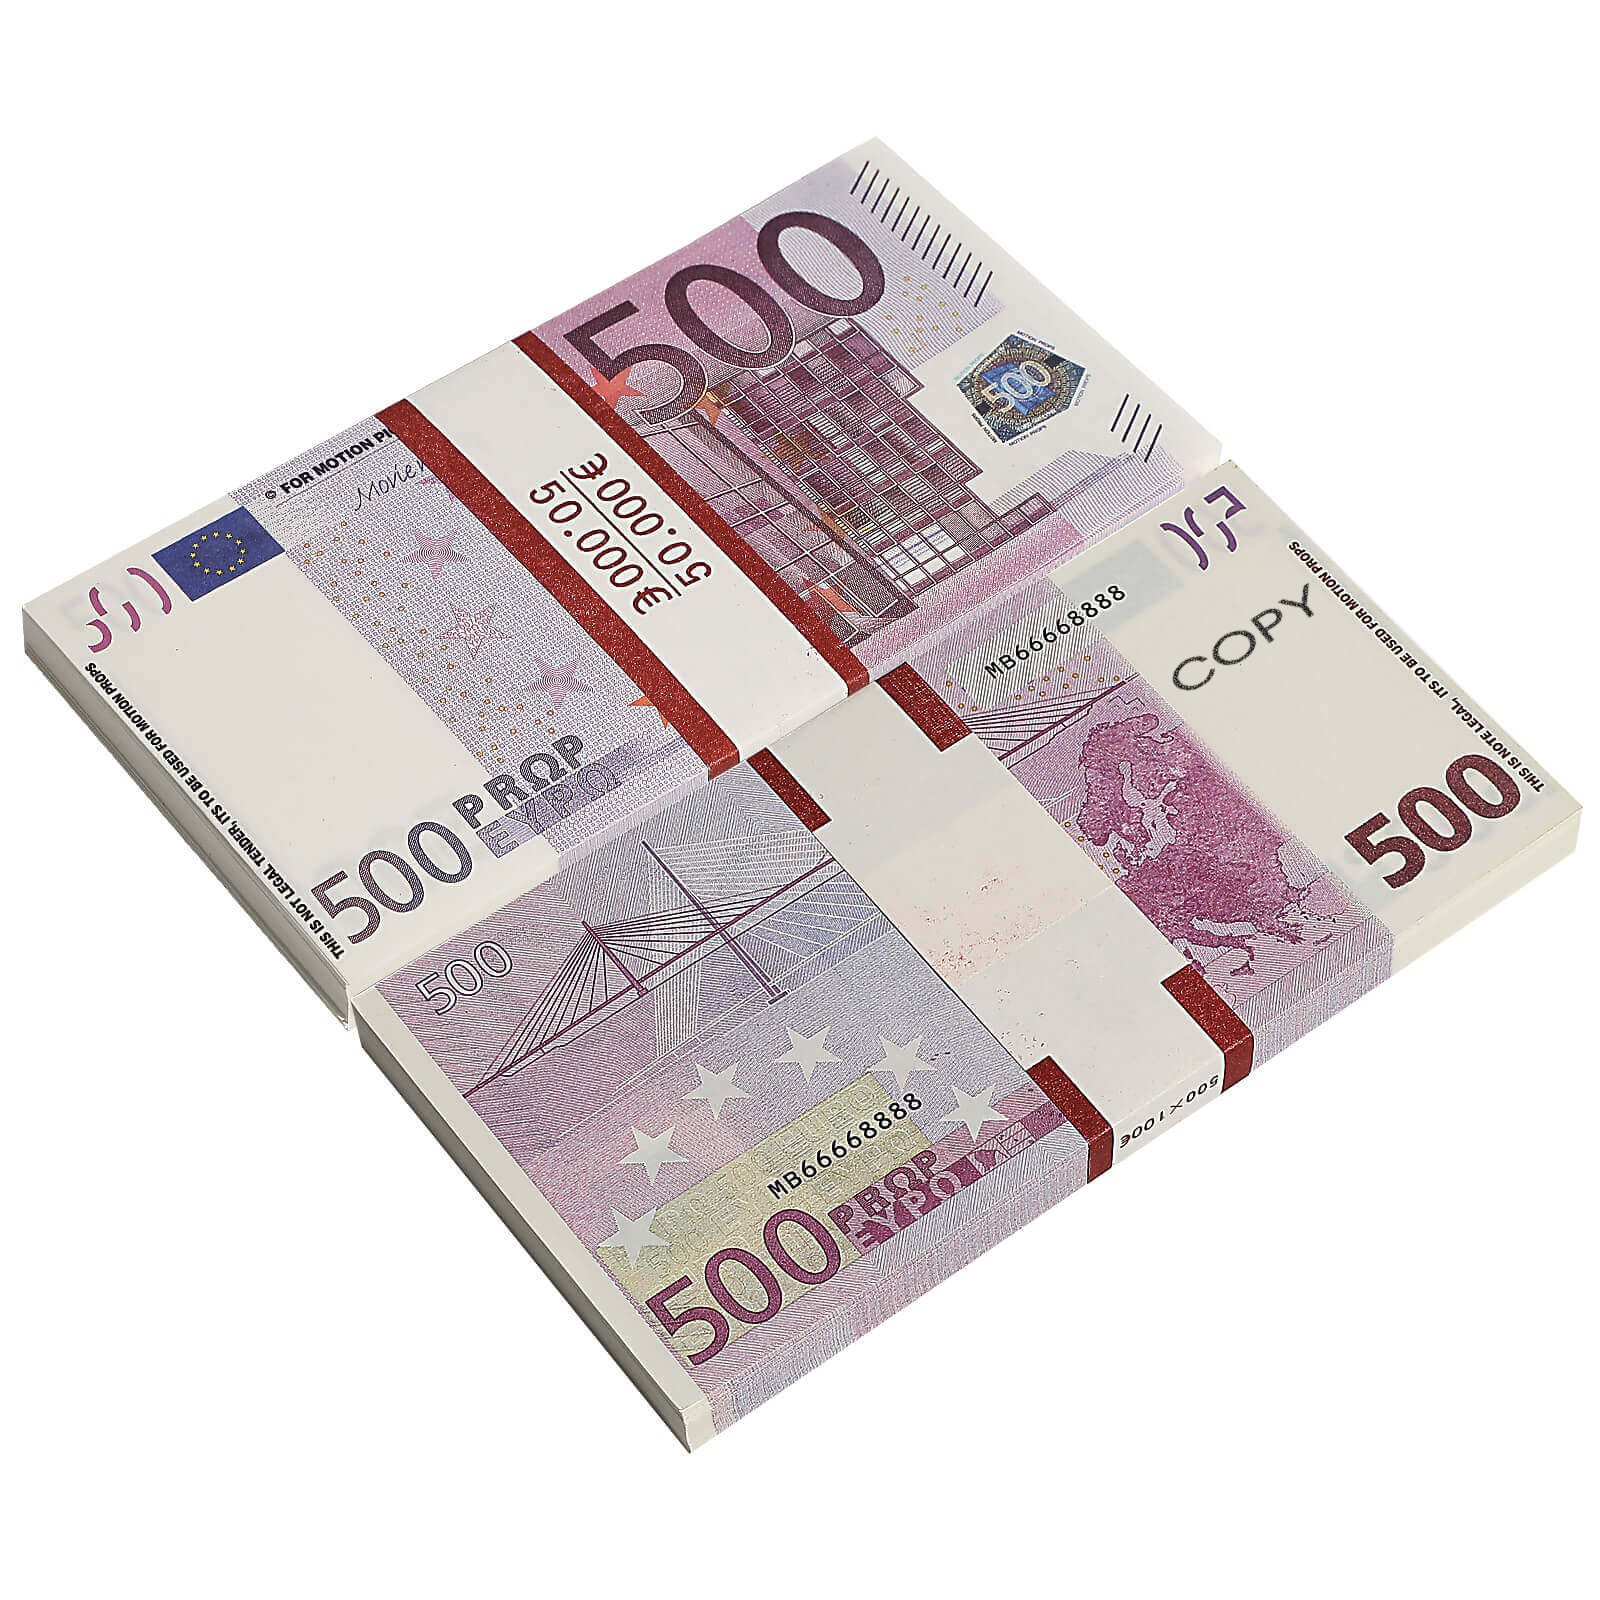 Prop Money 500 Euro Bill in vendita Online Euro Fake Movie Moneys 500 Bills Full Print Copy Party Realistic Fake UK Banknotes Paper Note Pretend Double Sided